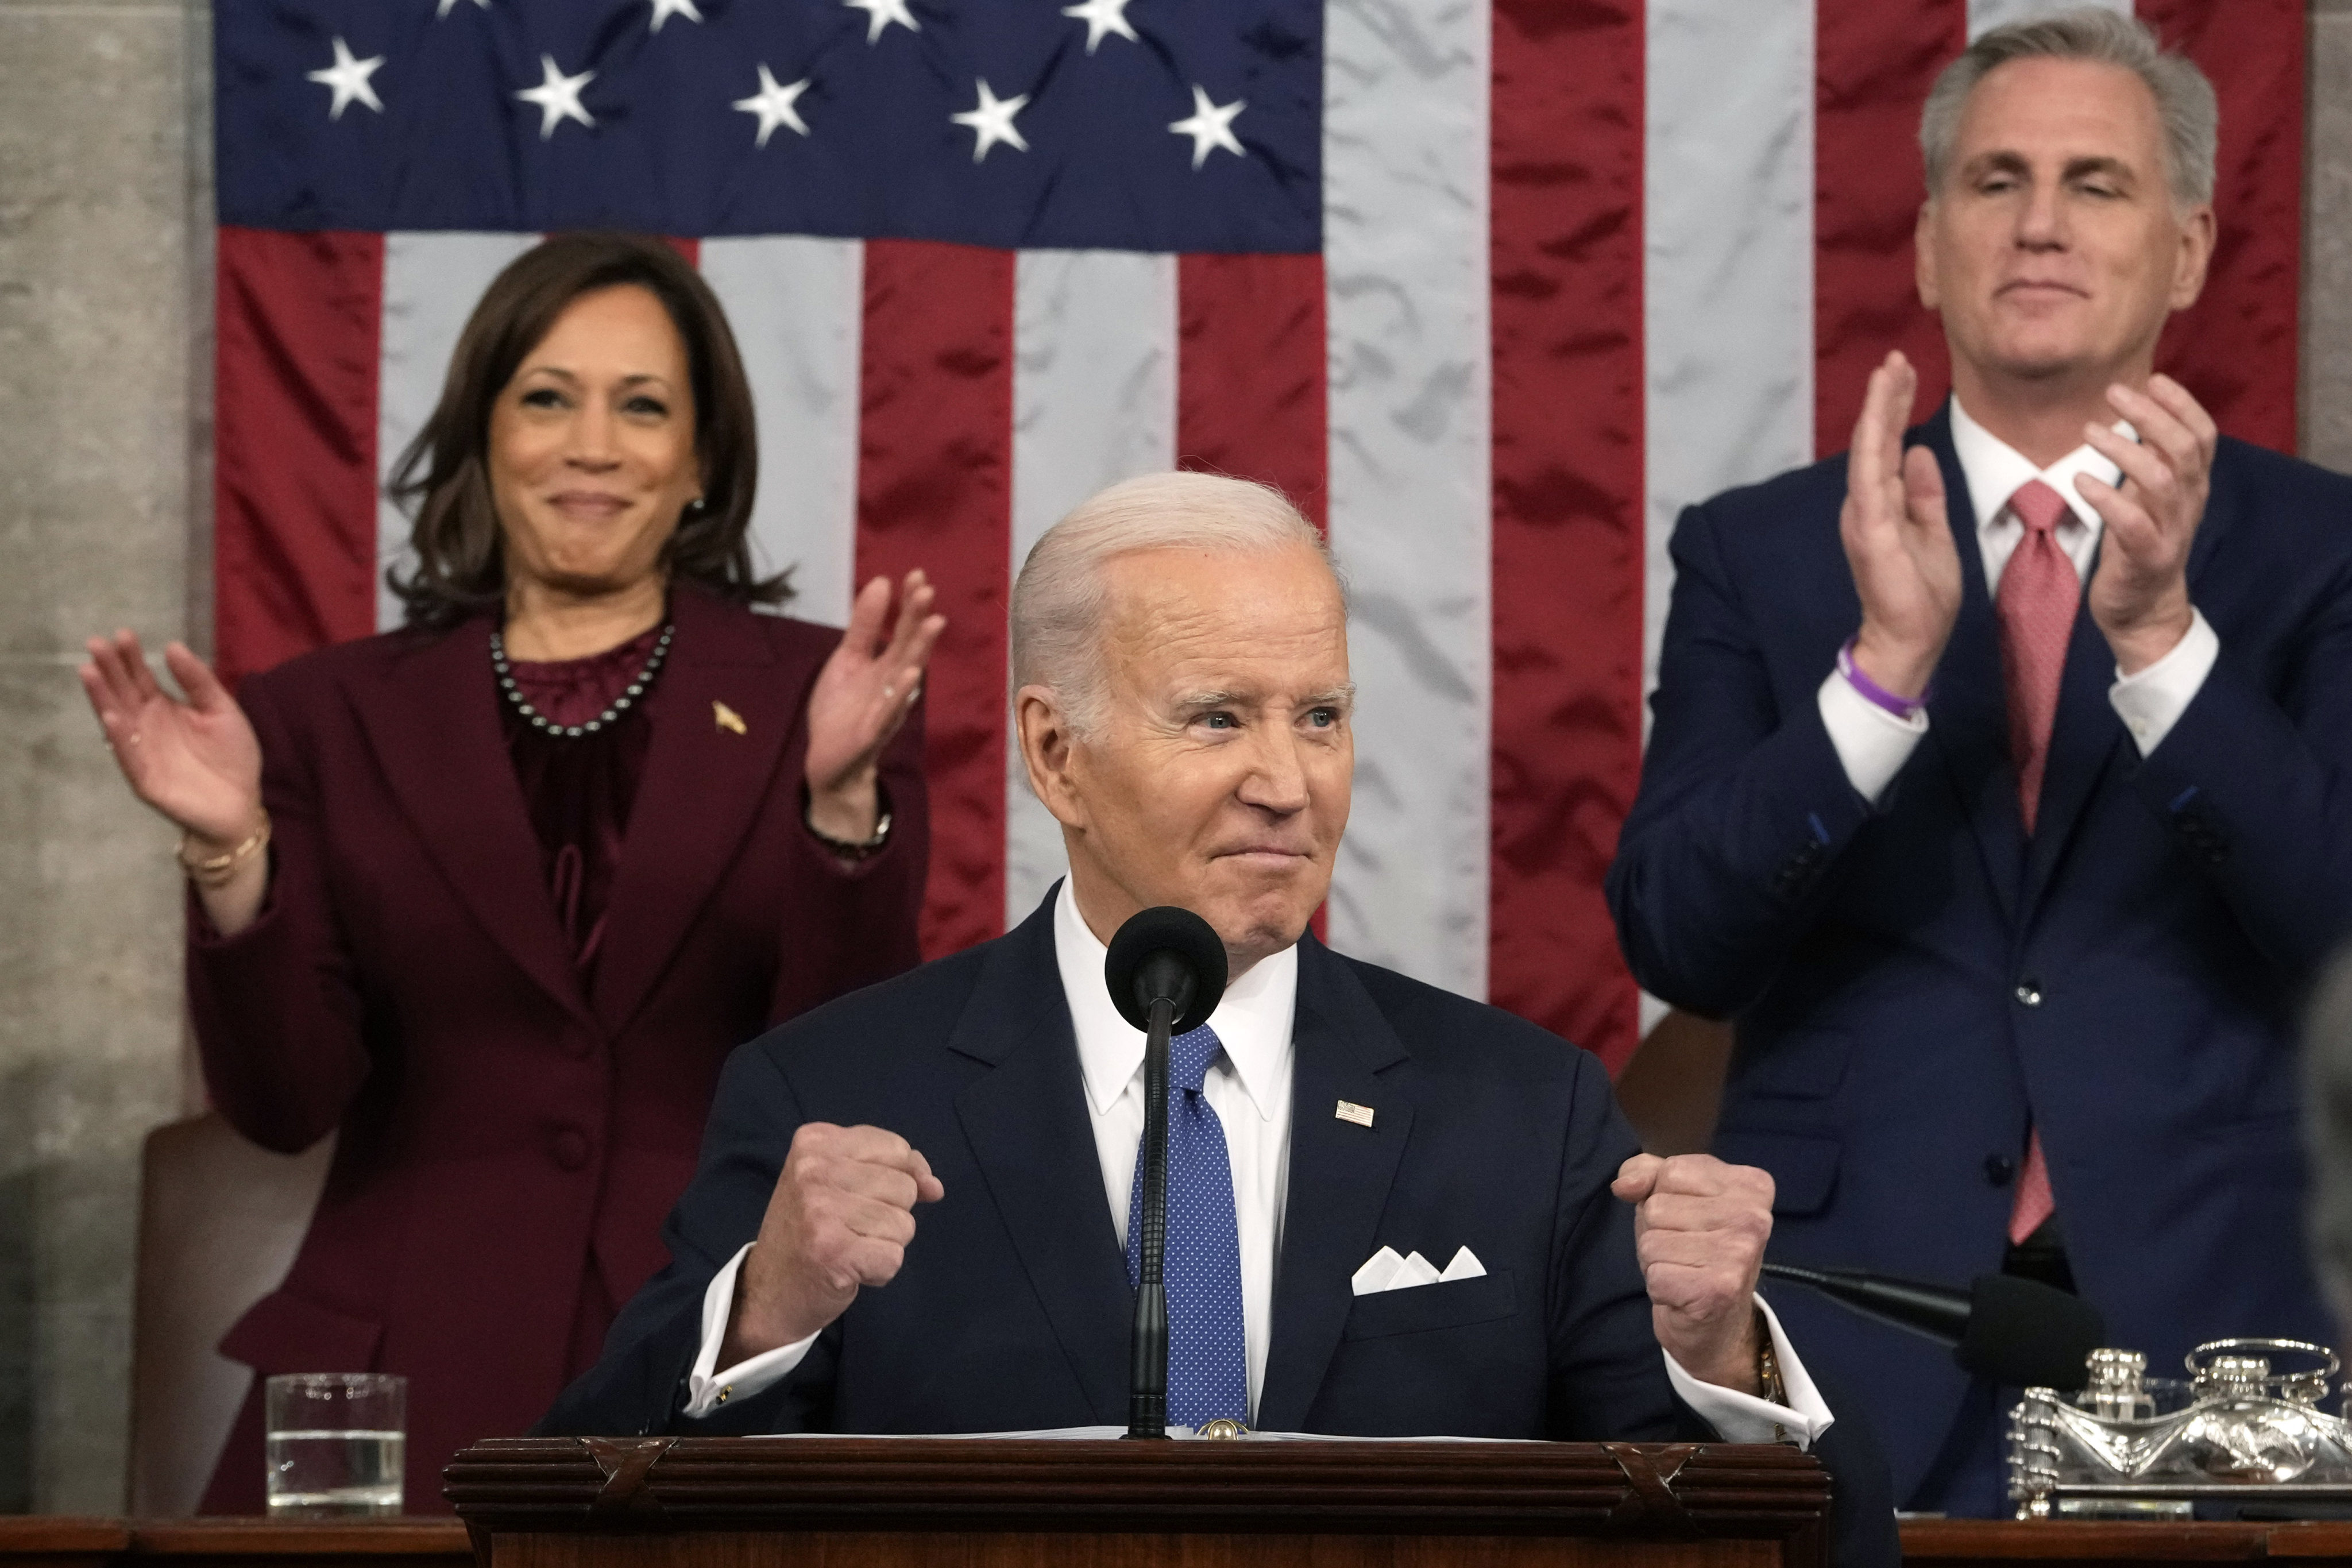 President Joe Biden delivers the State of the Union address to a joint session of Congress in Washington. Photo: AP